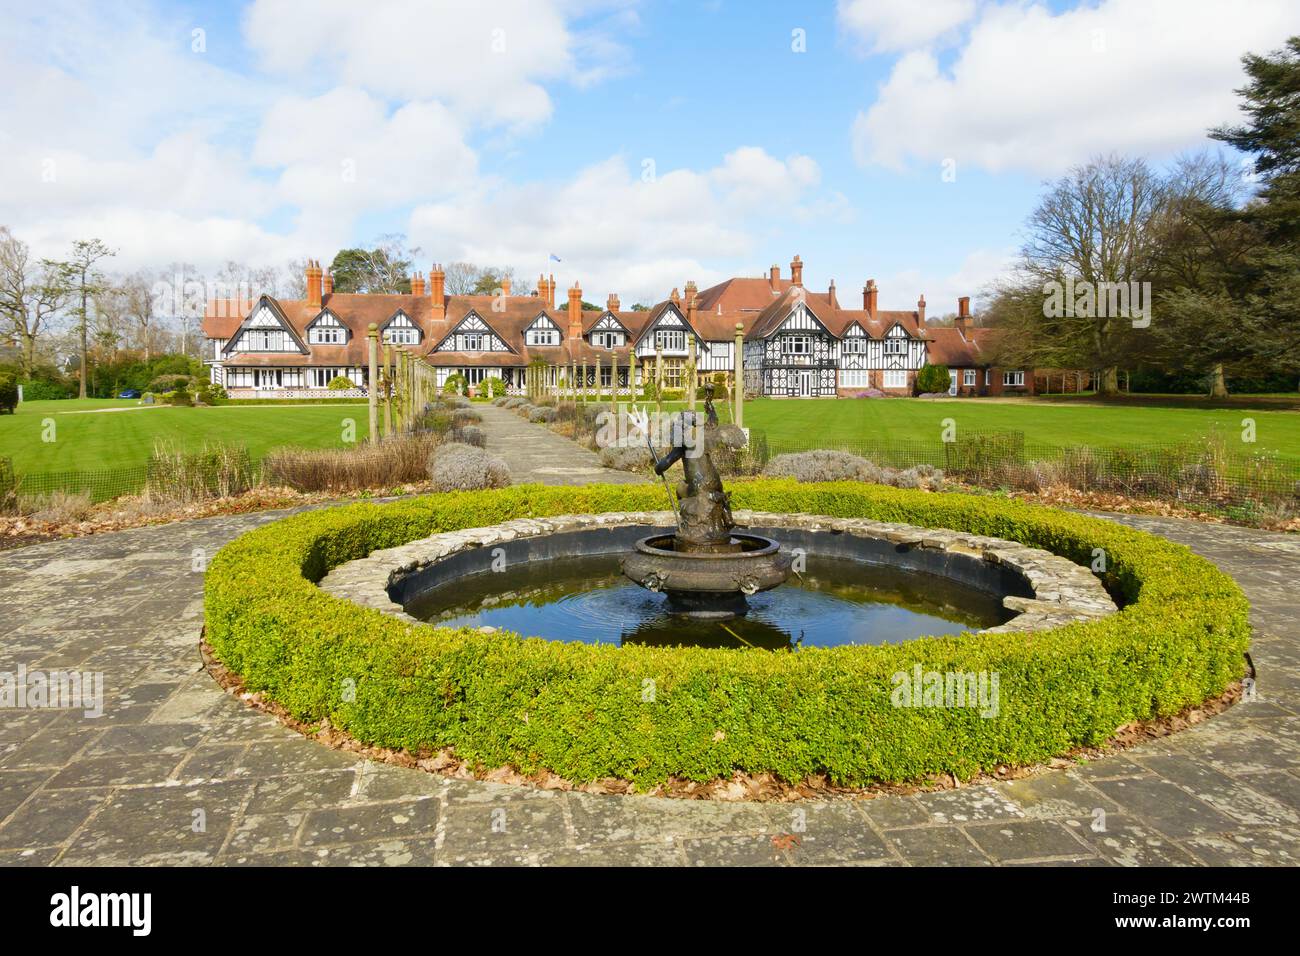 Il Petwood Hotel, ex ufficiale della Royal Air Force 617 Dambusters Squadron. Woodhall Spa, Lincolnshire, Inghilterra Foto Stock